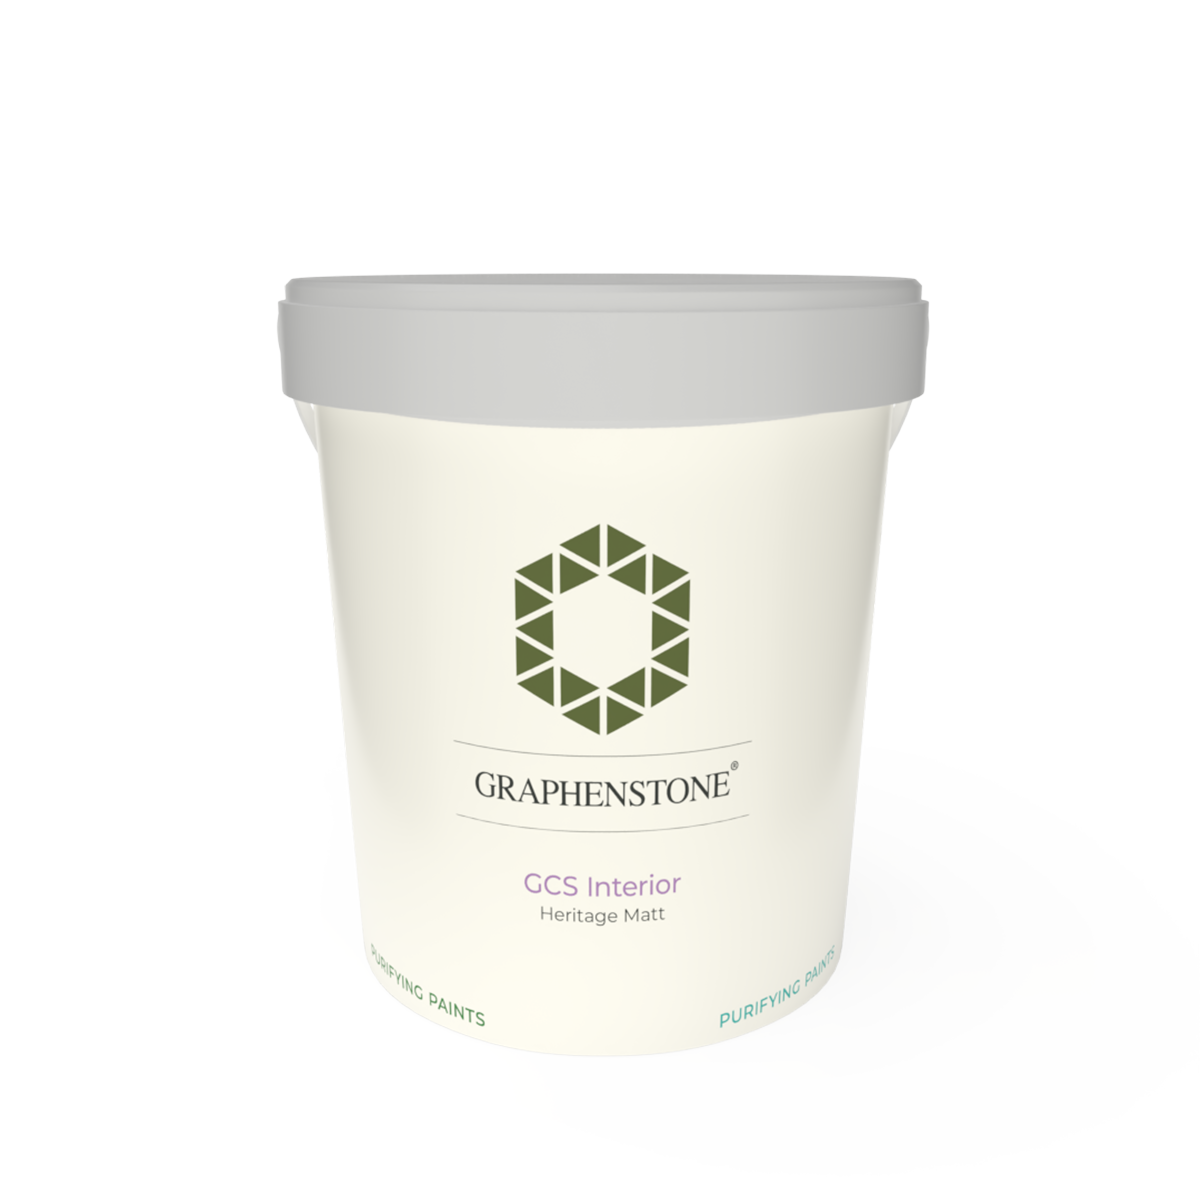 GCS Interior Colour – Our classic, breathable matt for heritage / listed properties, Ultra Matt finish for Lime plasters